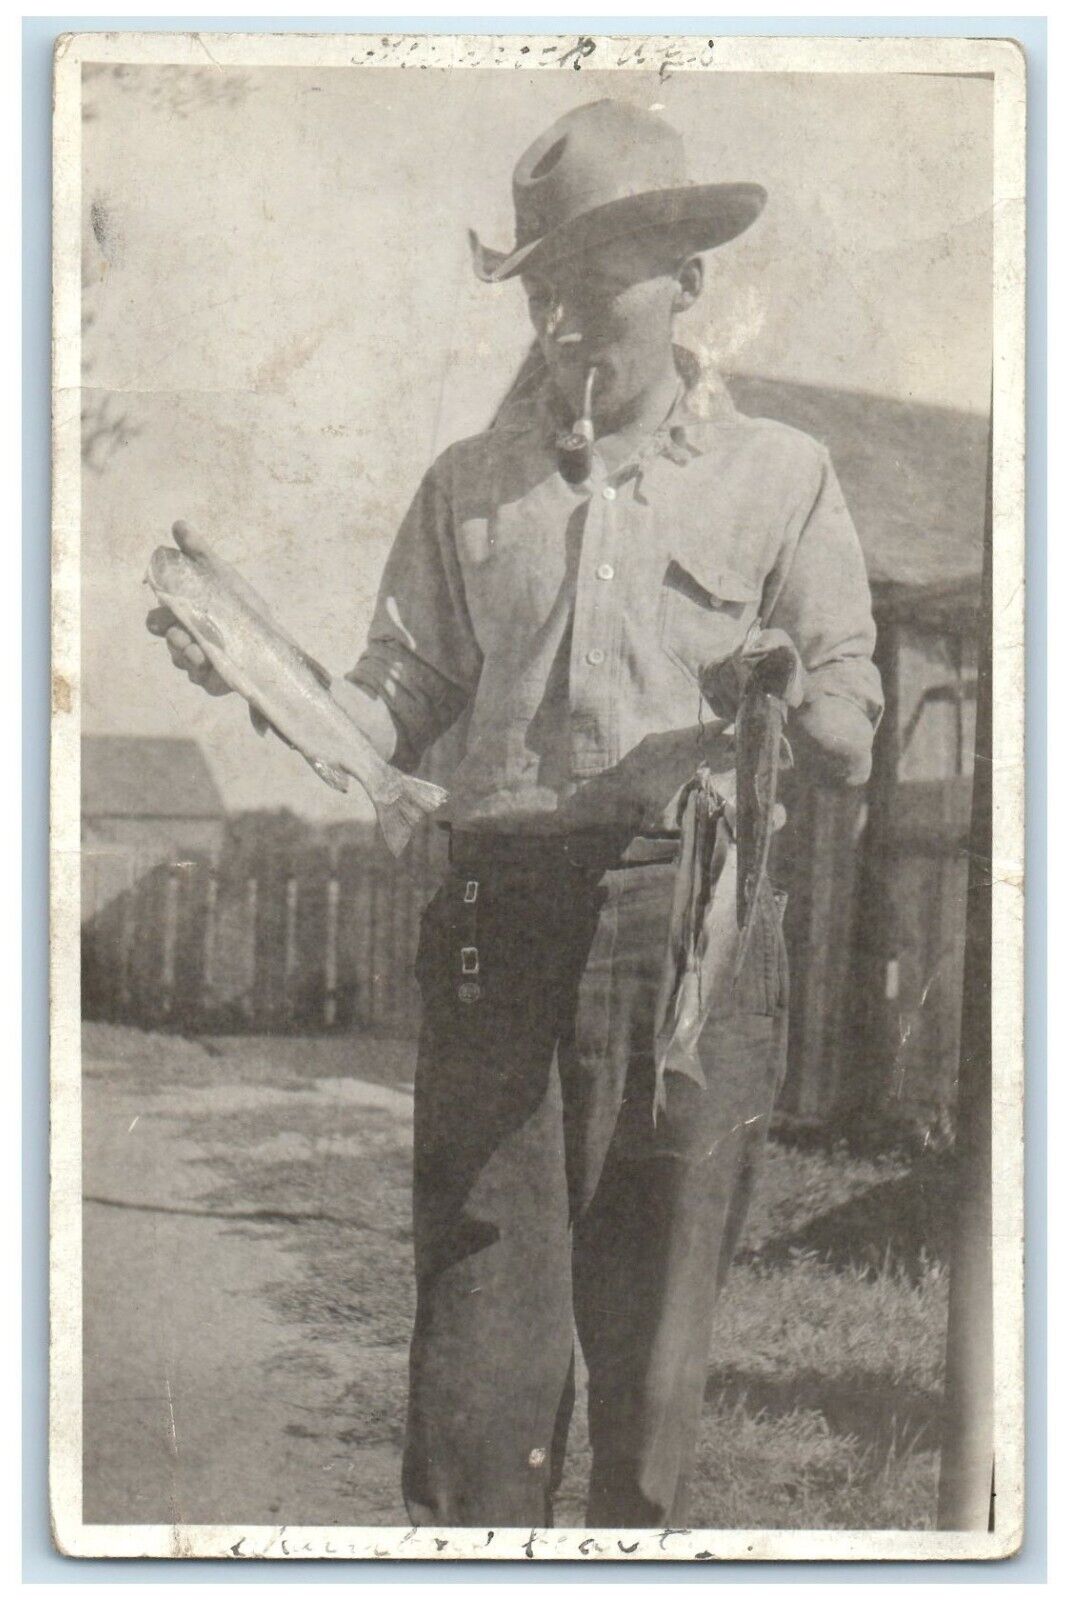 c1910's Boy Cached Fishes Smoking Pipe Glenrock Wyoming WY RPPC Photo Postcard